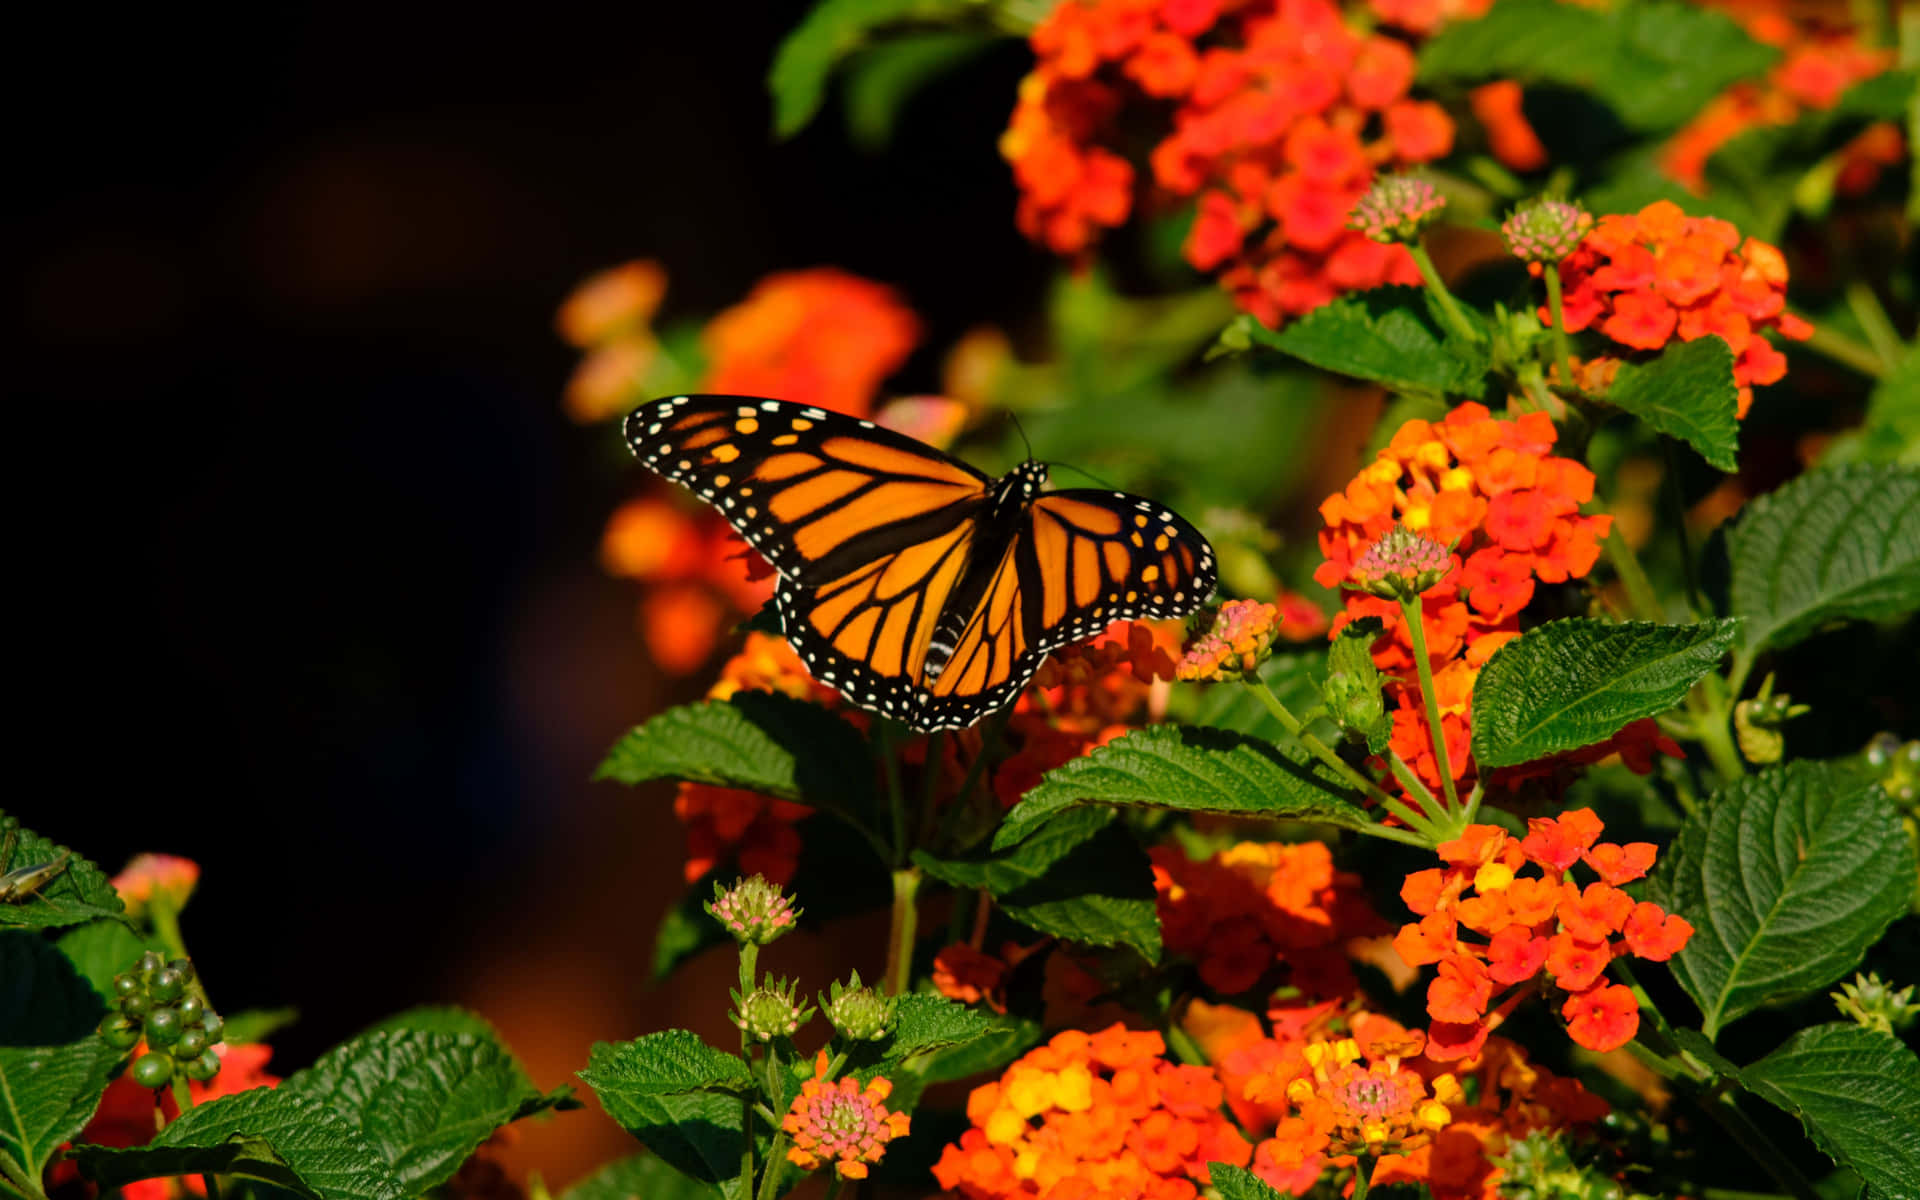 A vibrant monarch butterfly resting on a white daisy flower